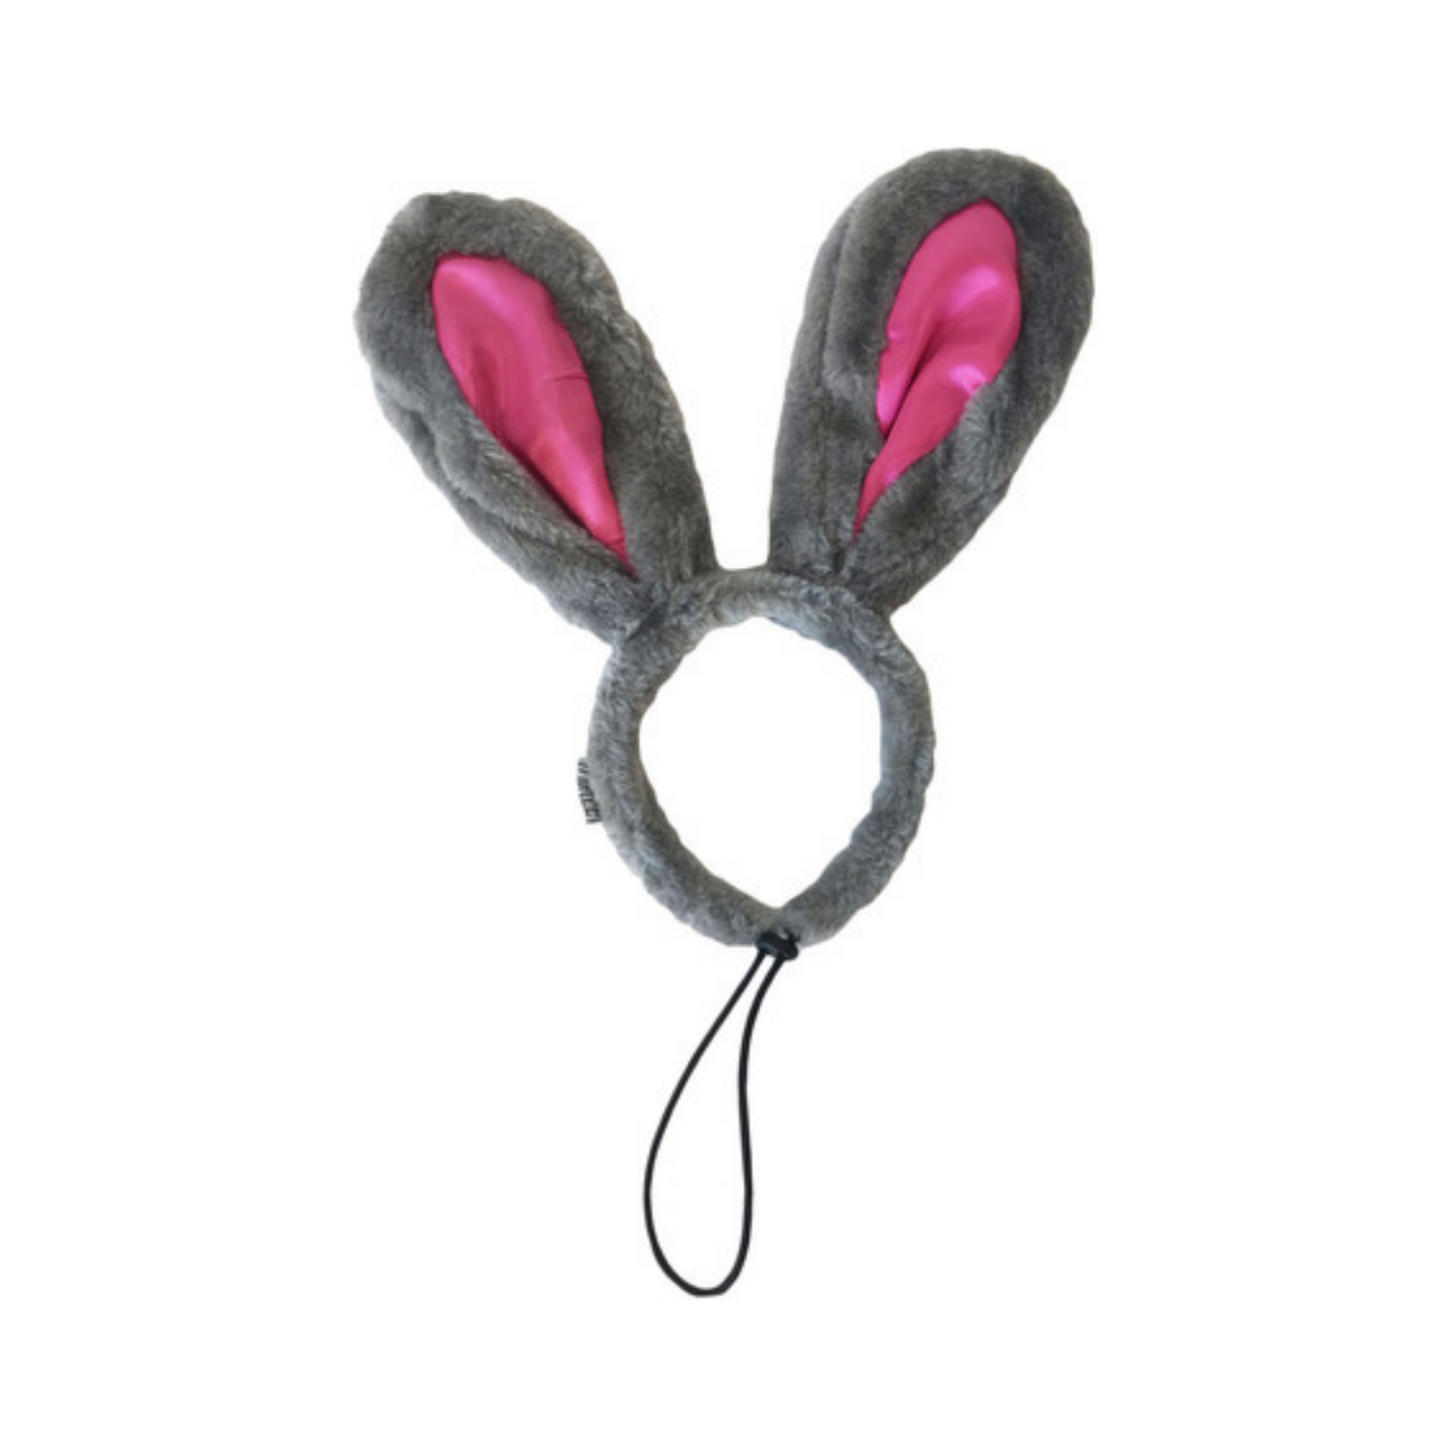 Midlee Easter Bunny Gray & Pink Rabbit Ears for Large Dogs Headband With Tail